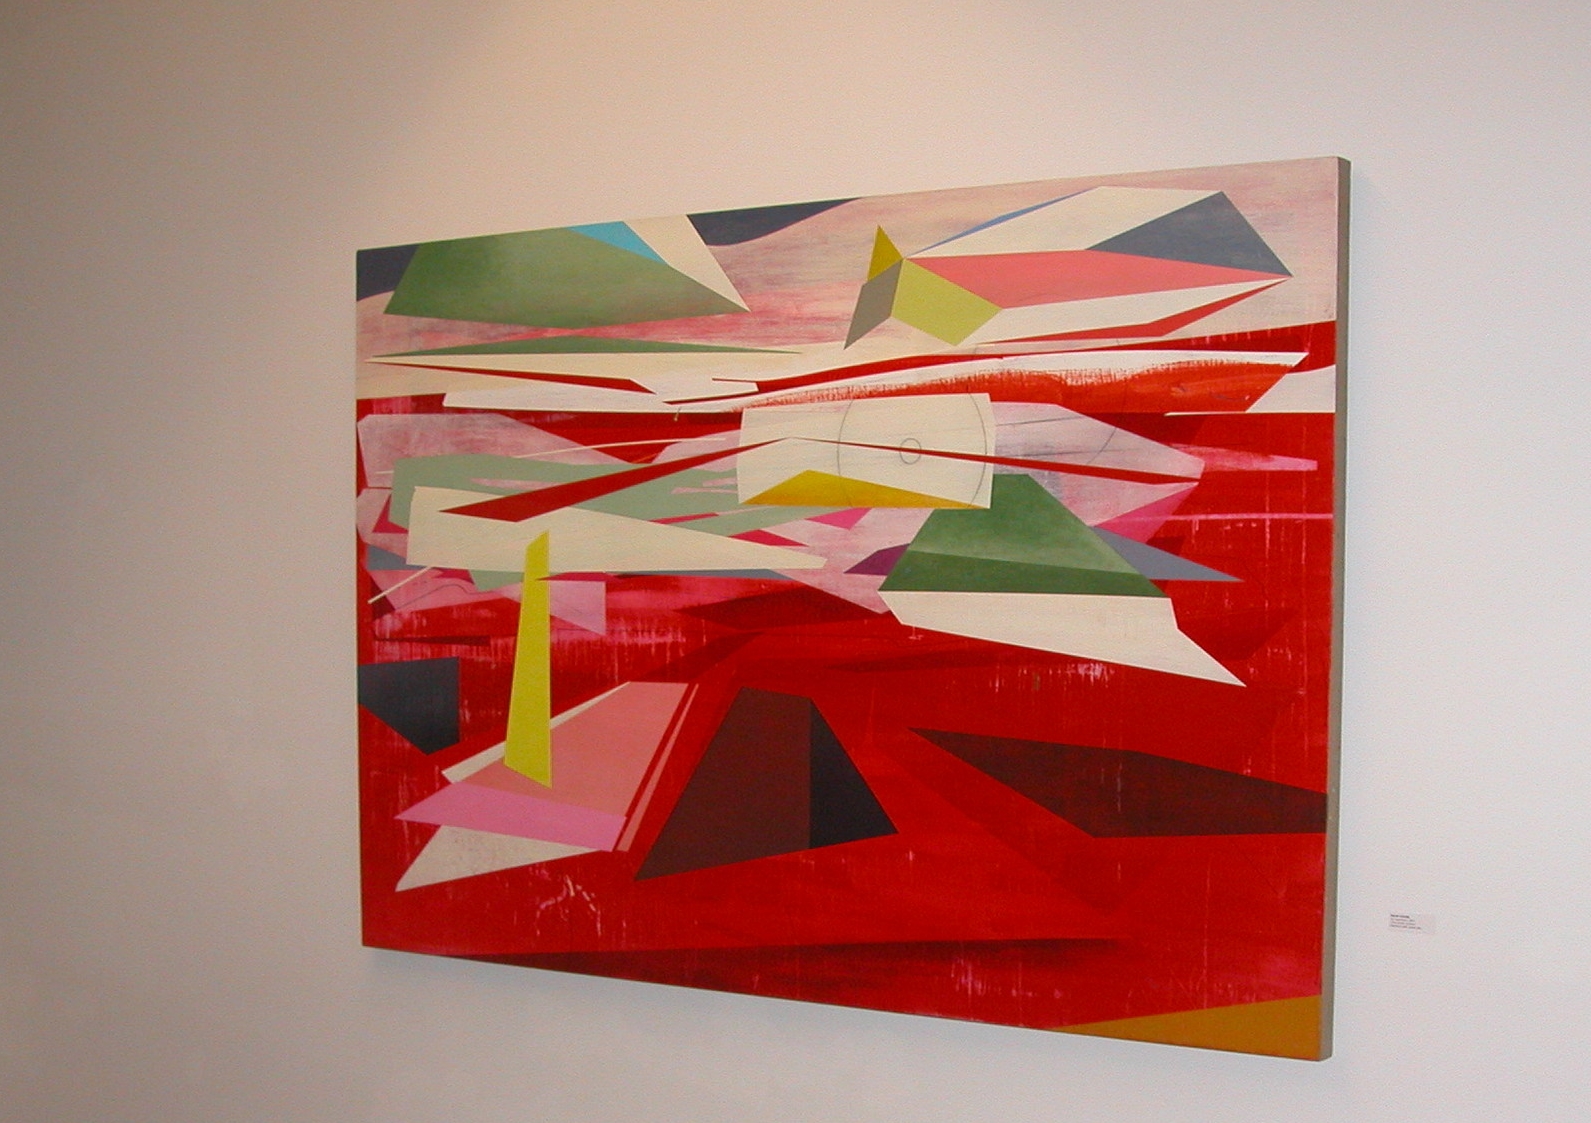  David Collins On approach, 2010 oil and acrylic on linen 46x70 inches 